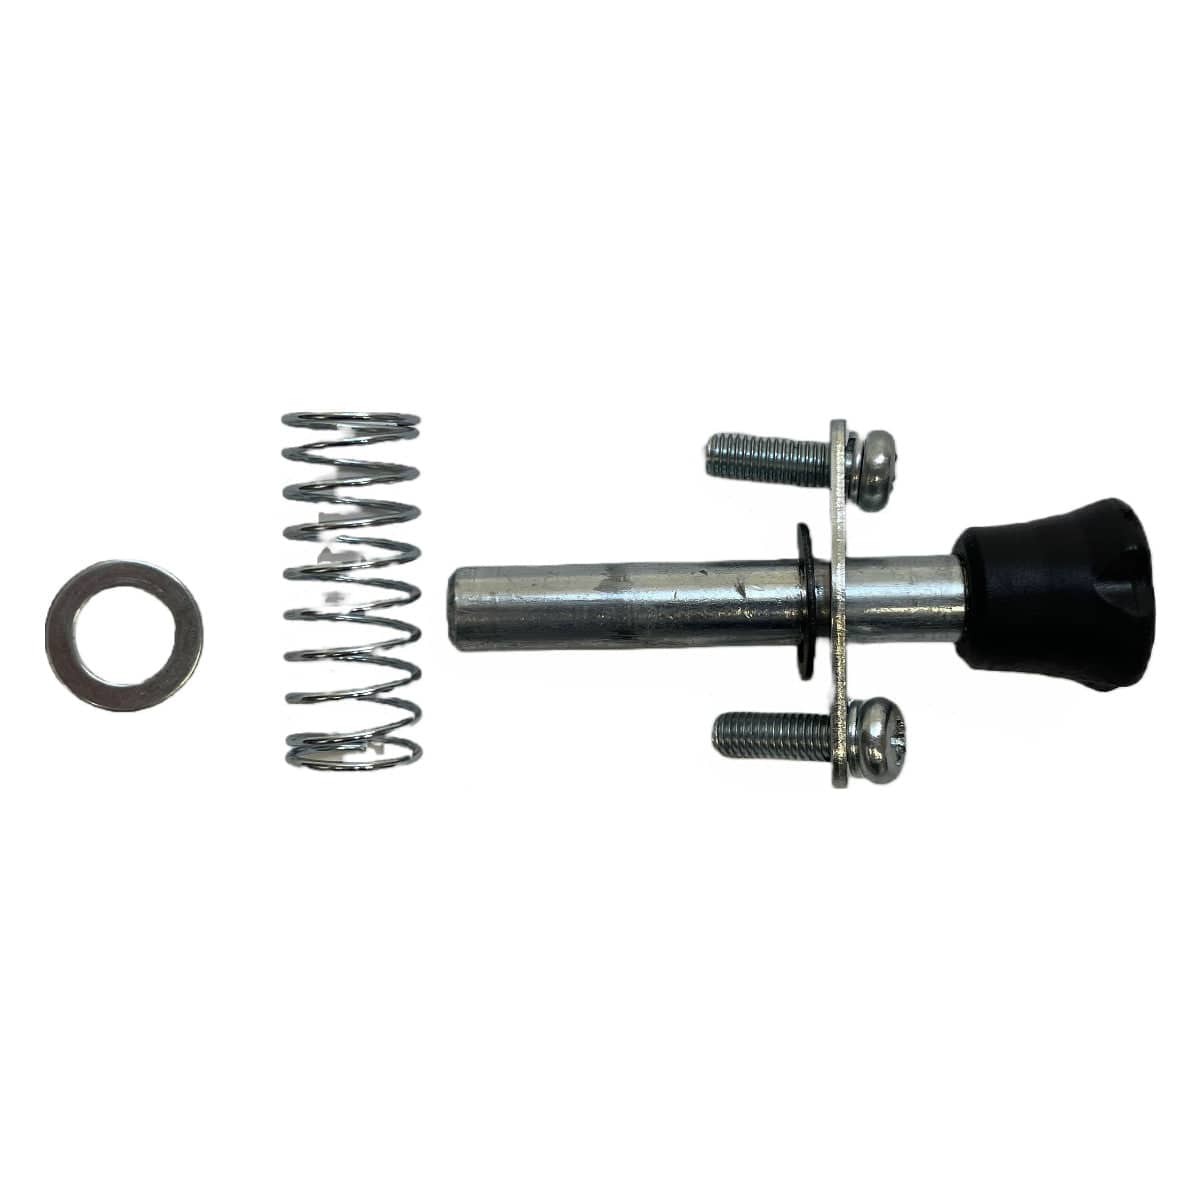 iQMS362 Spindle Lock Hardware Kit (For 362 model) - iqpowertools